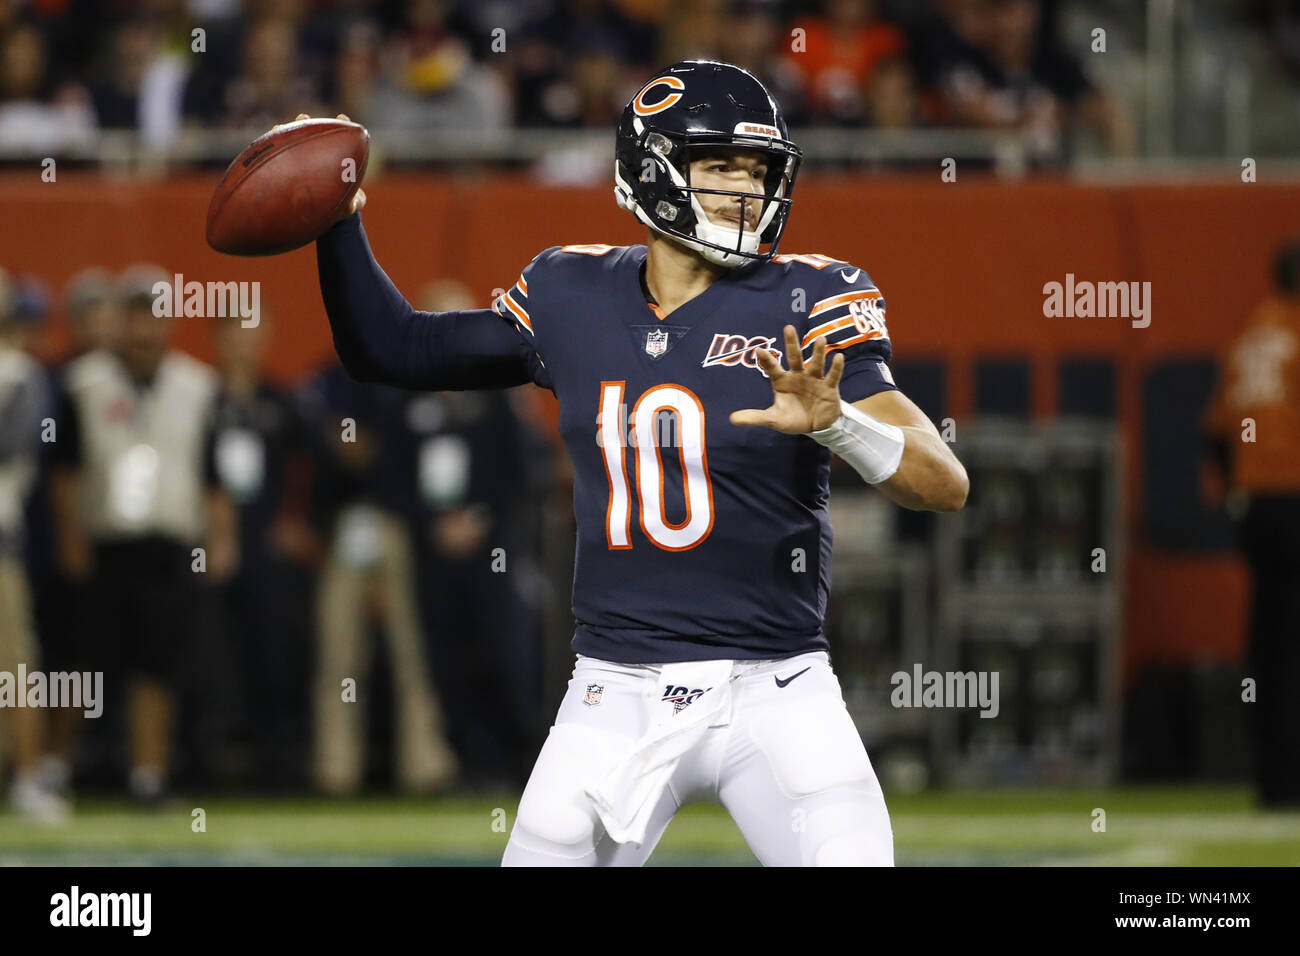 Chicago, United States. 05th Sep, 2019. Chicago Bears quarterback Mitchell Trubisky (10) looks to pass the ball against the Green Bay Packers during the first half of an NFL game at Soldier Field in Chicago on Thursday, September 5, 2019. Photo by Kamil Krzaczynski/UPI Credit: UPI/Alamy Live News Stock Photo